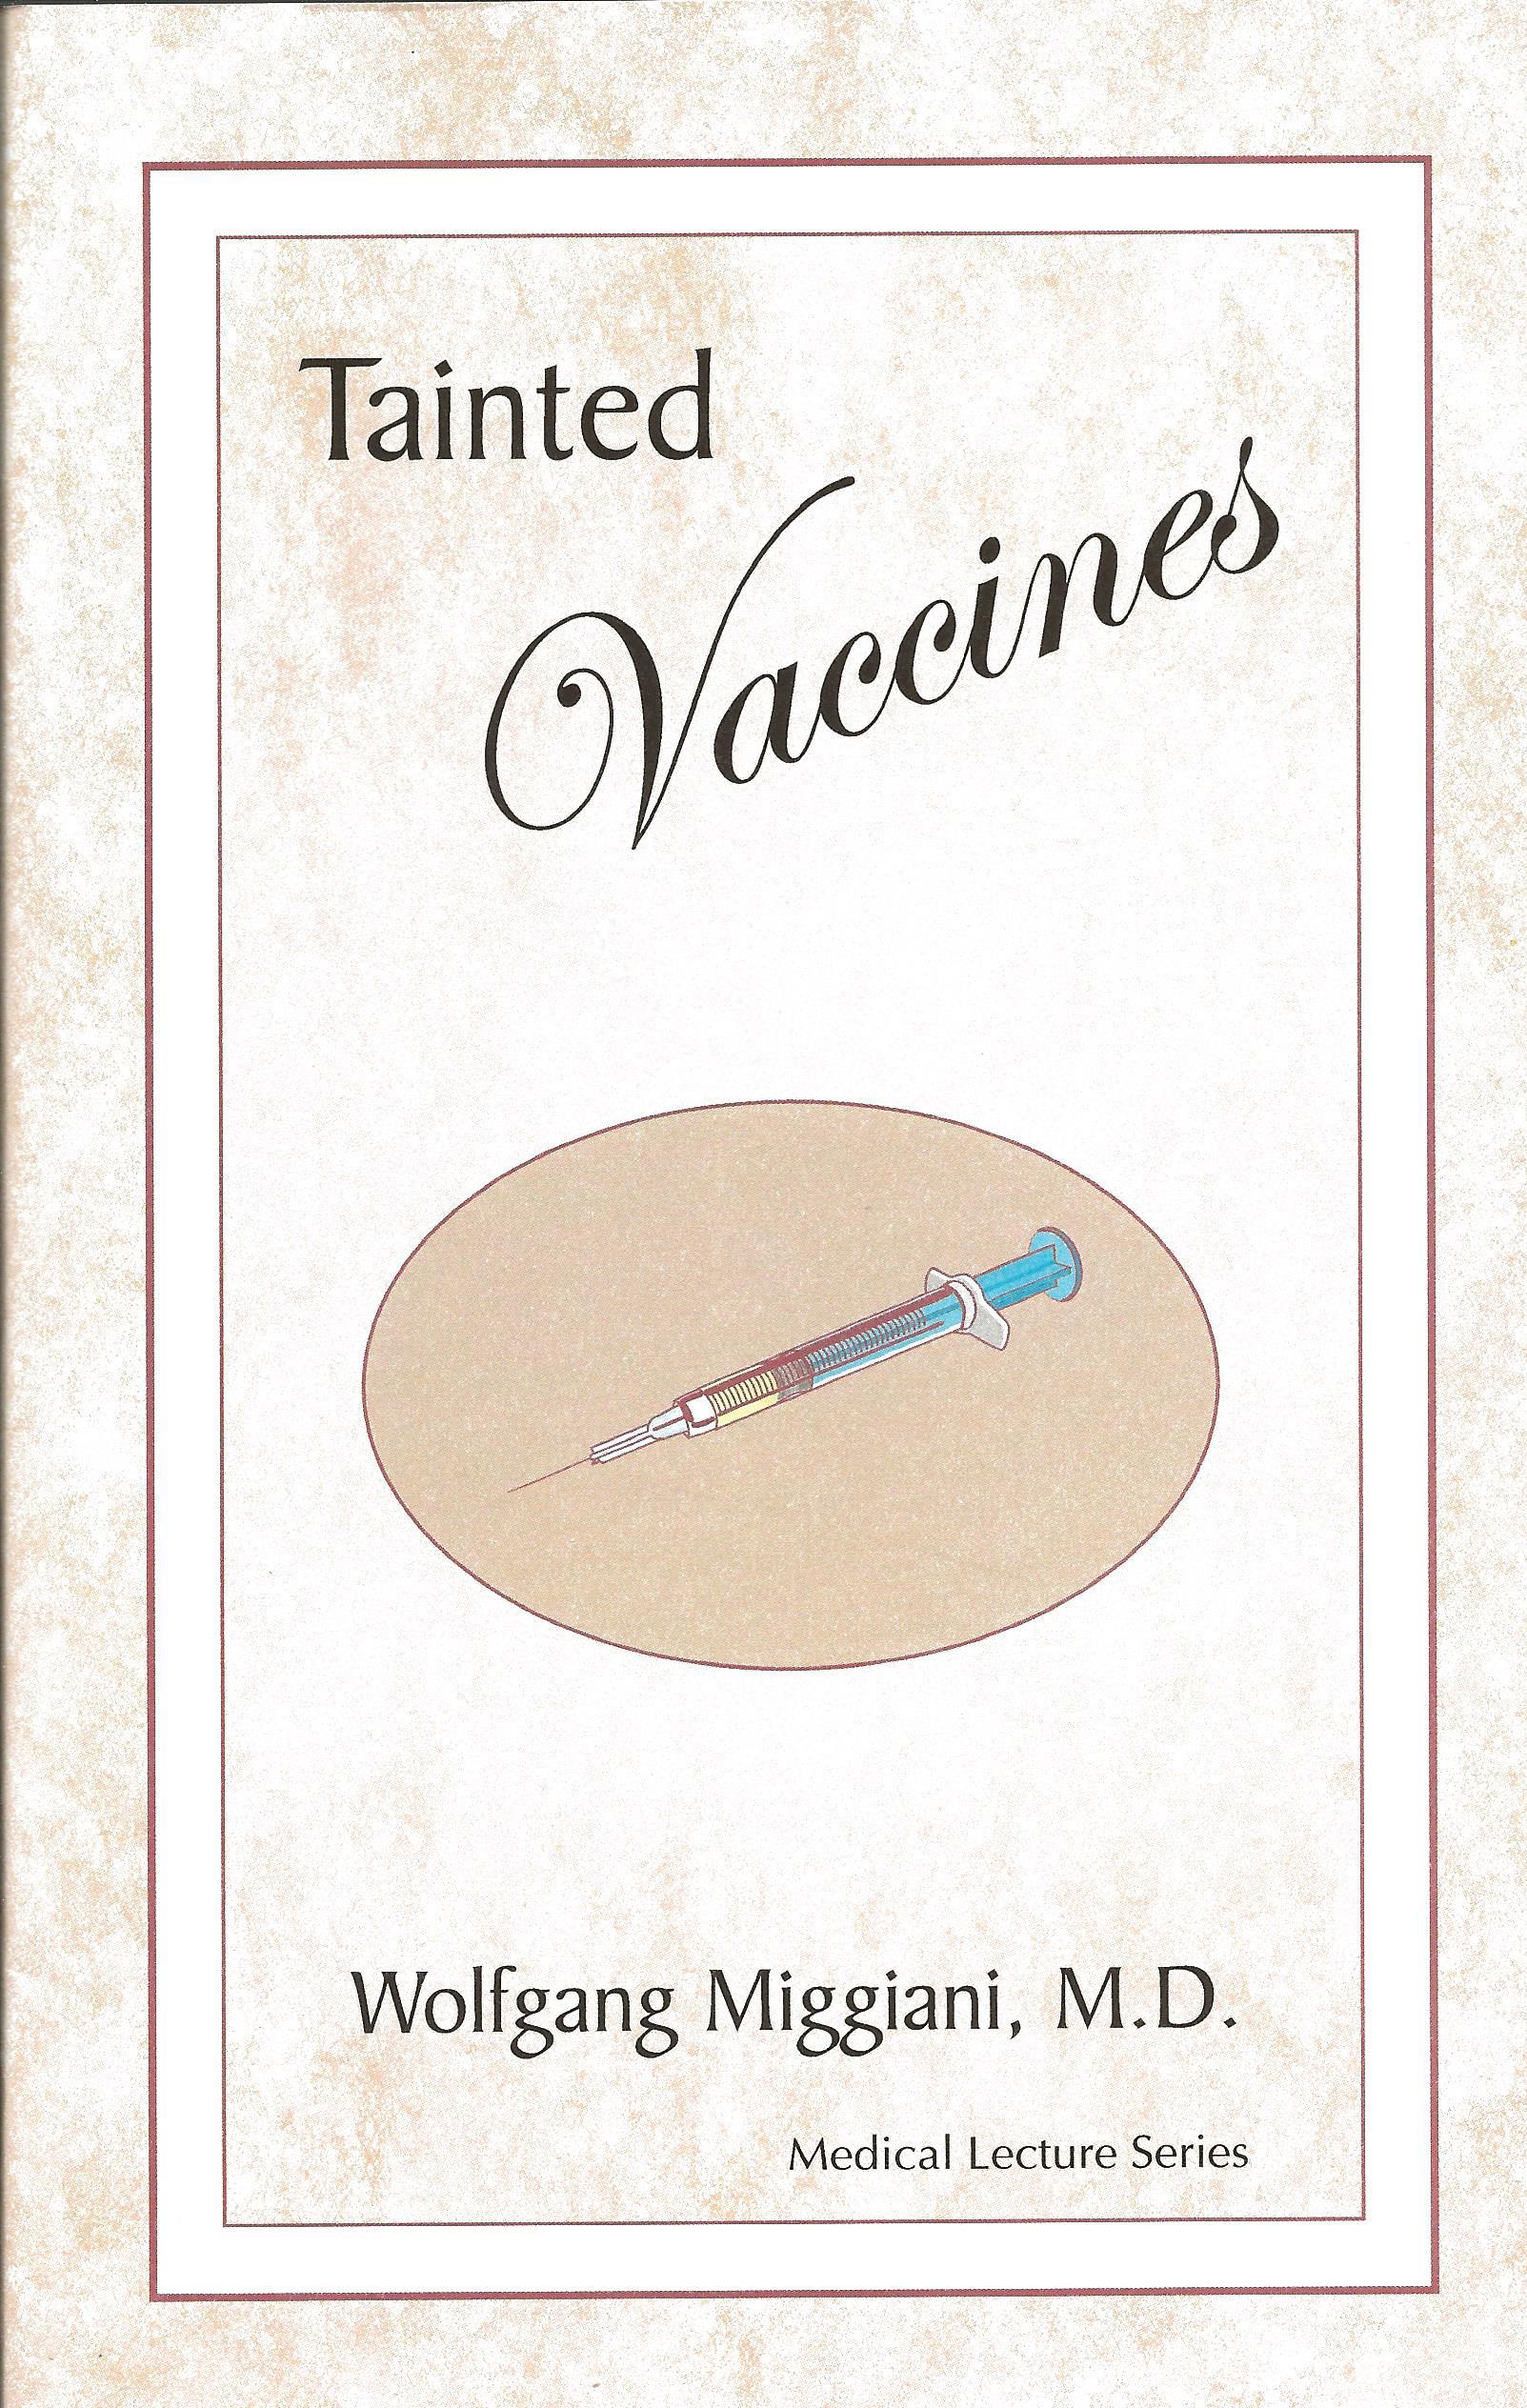 TAINTED VACCINES Wolfgang Miggiani, M.D.